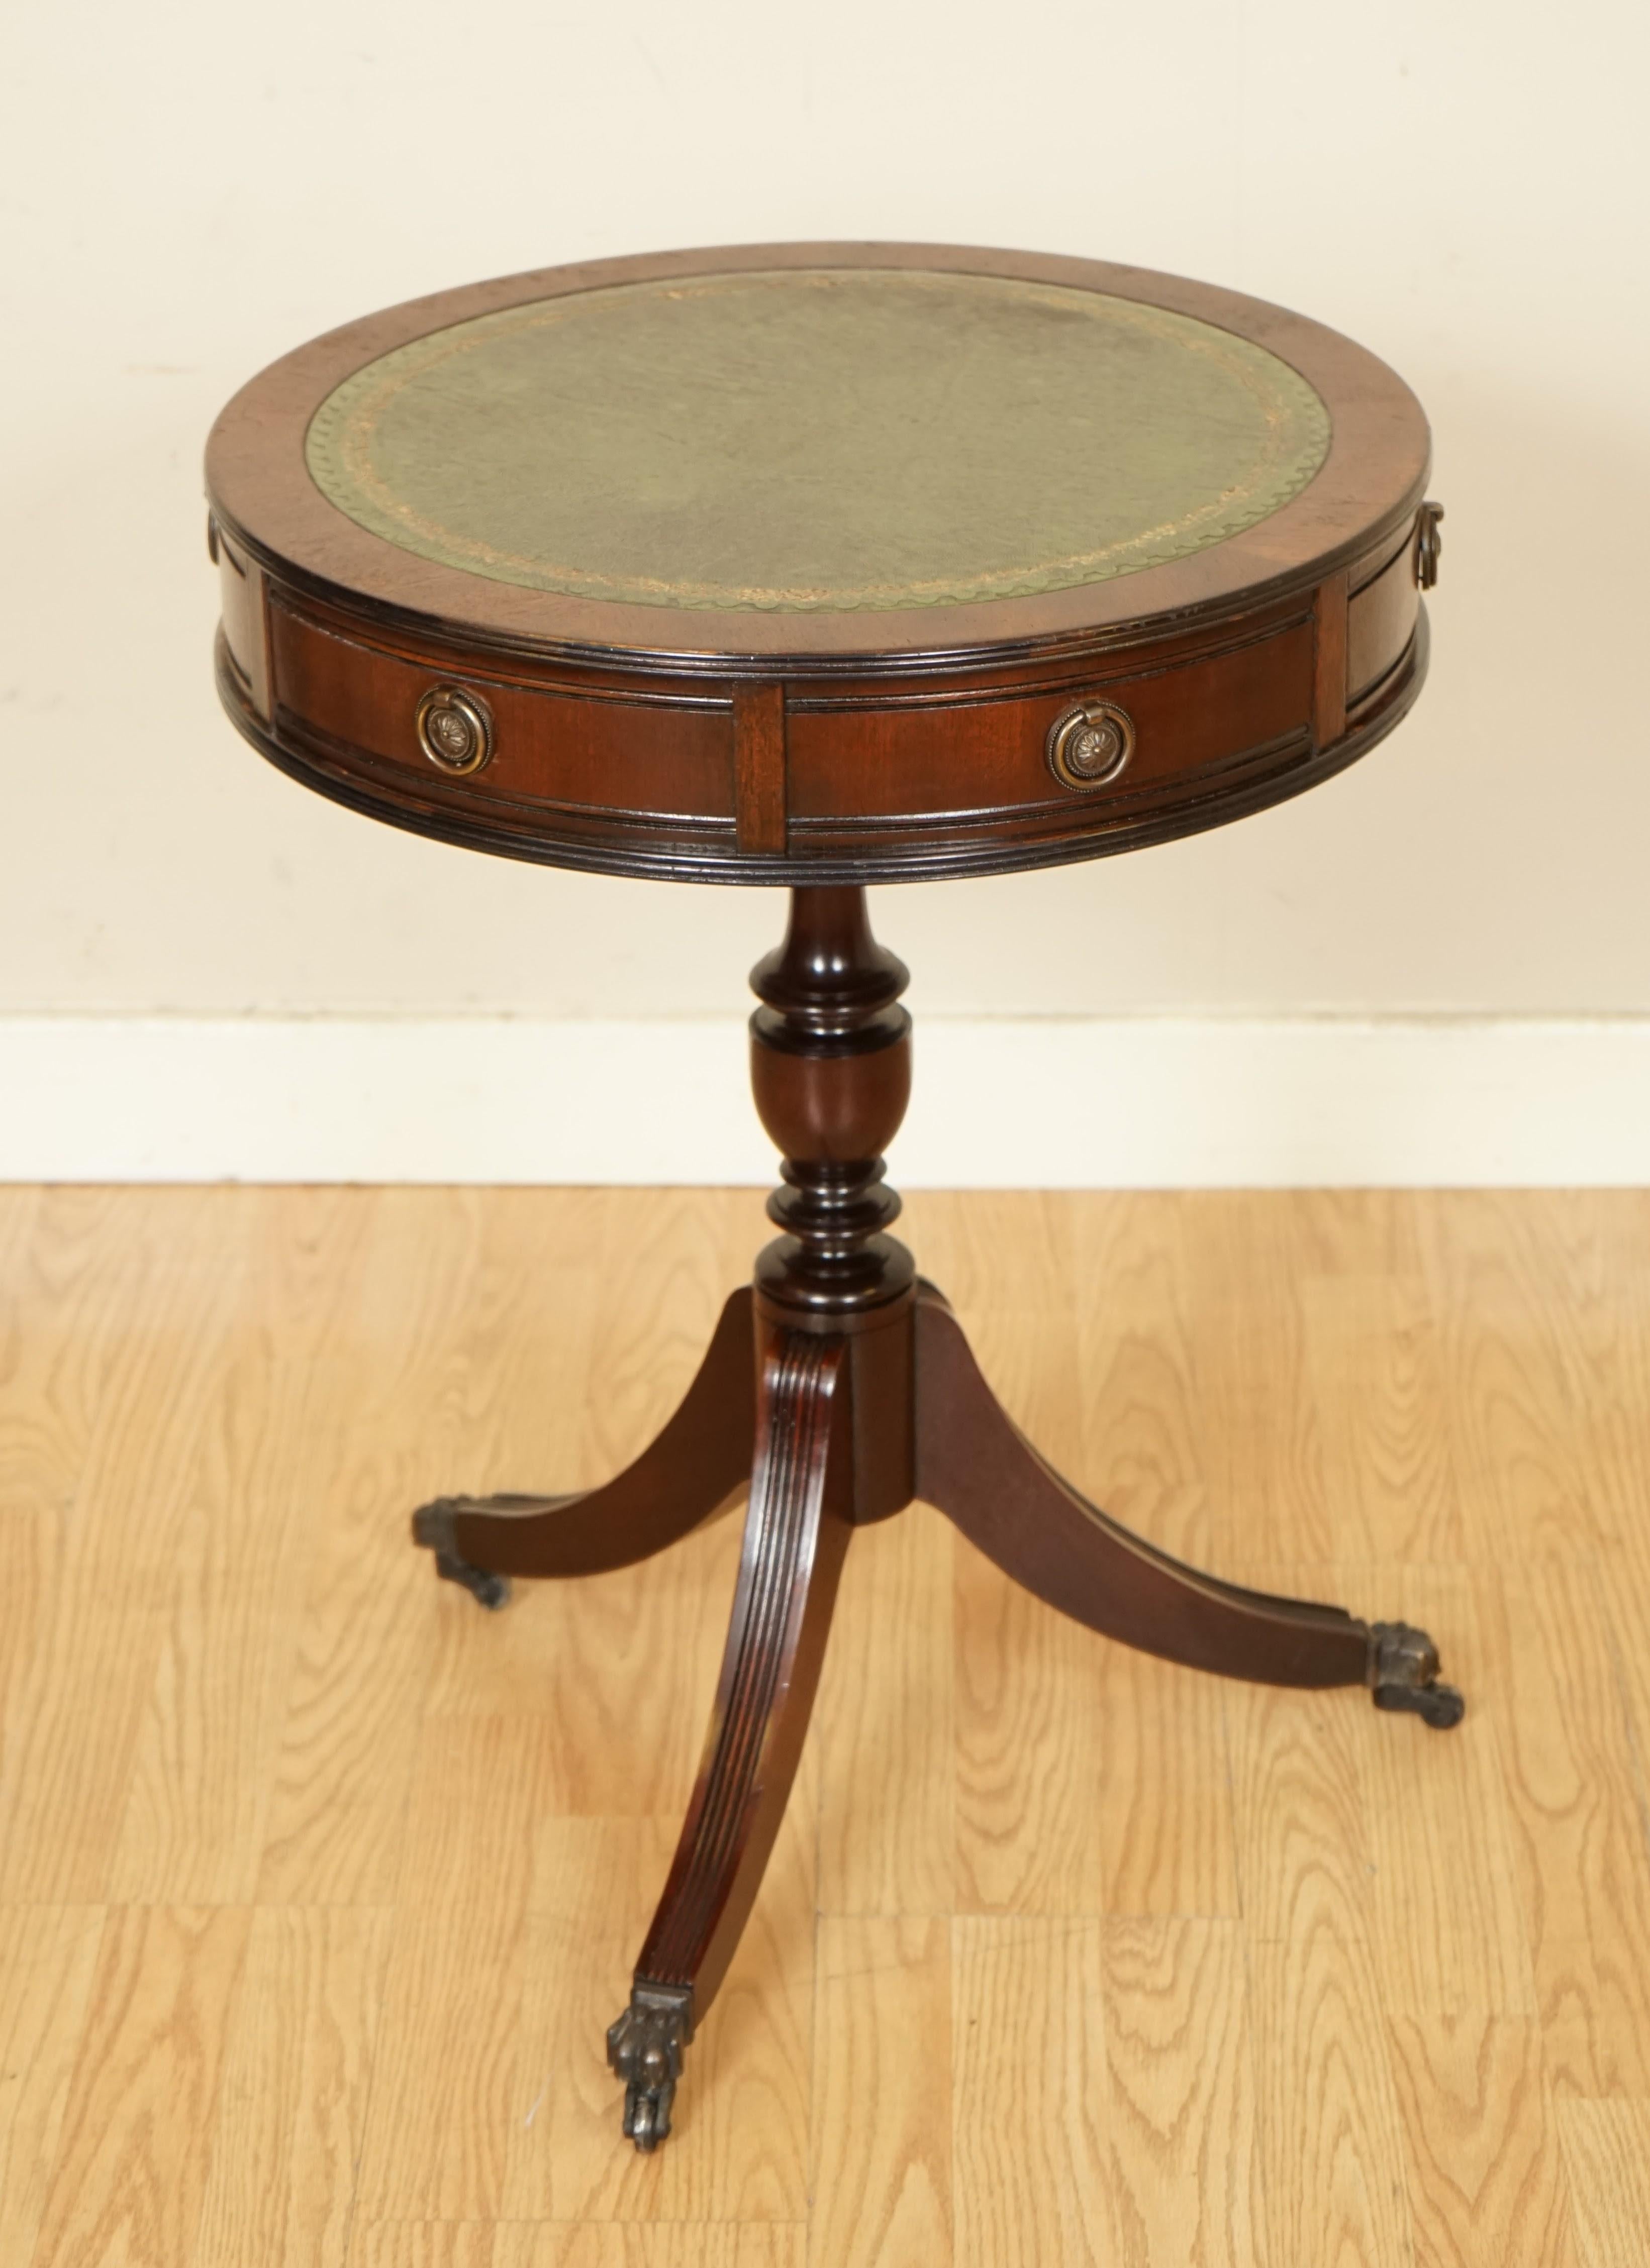 We are so excited to present to you this lovely regency drum table.
It has two drawers which are very useful to store small items.
The table can serve as a side table, next to a pair of armchairs, corner in a room or any other place.
It has a